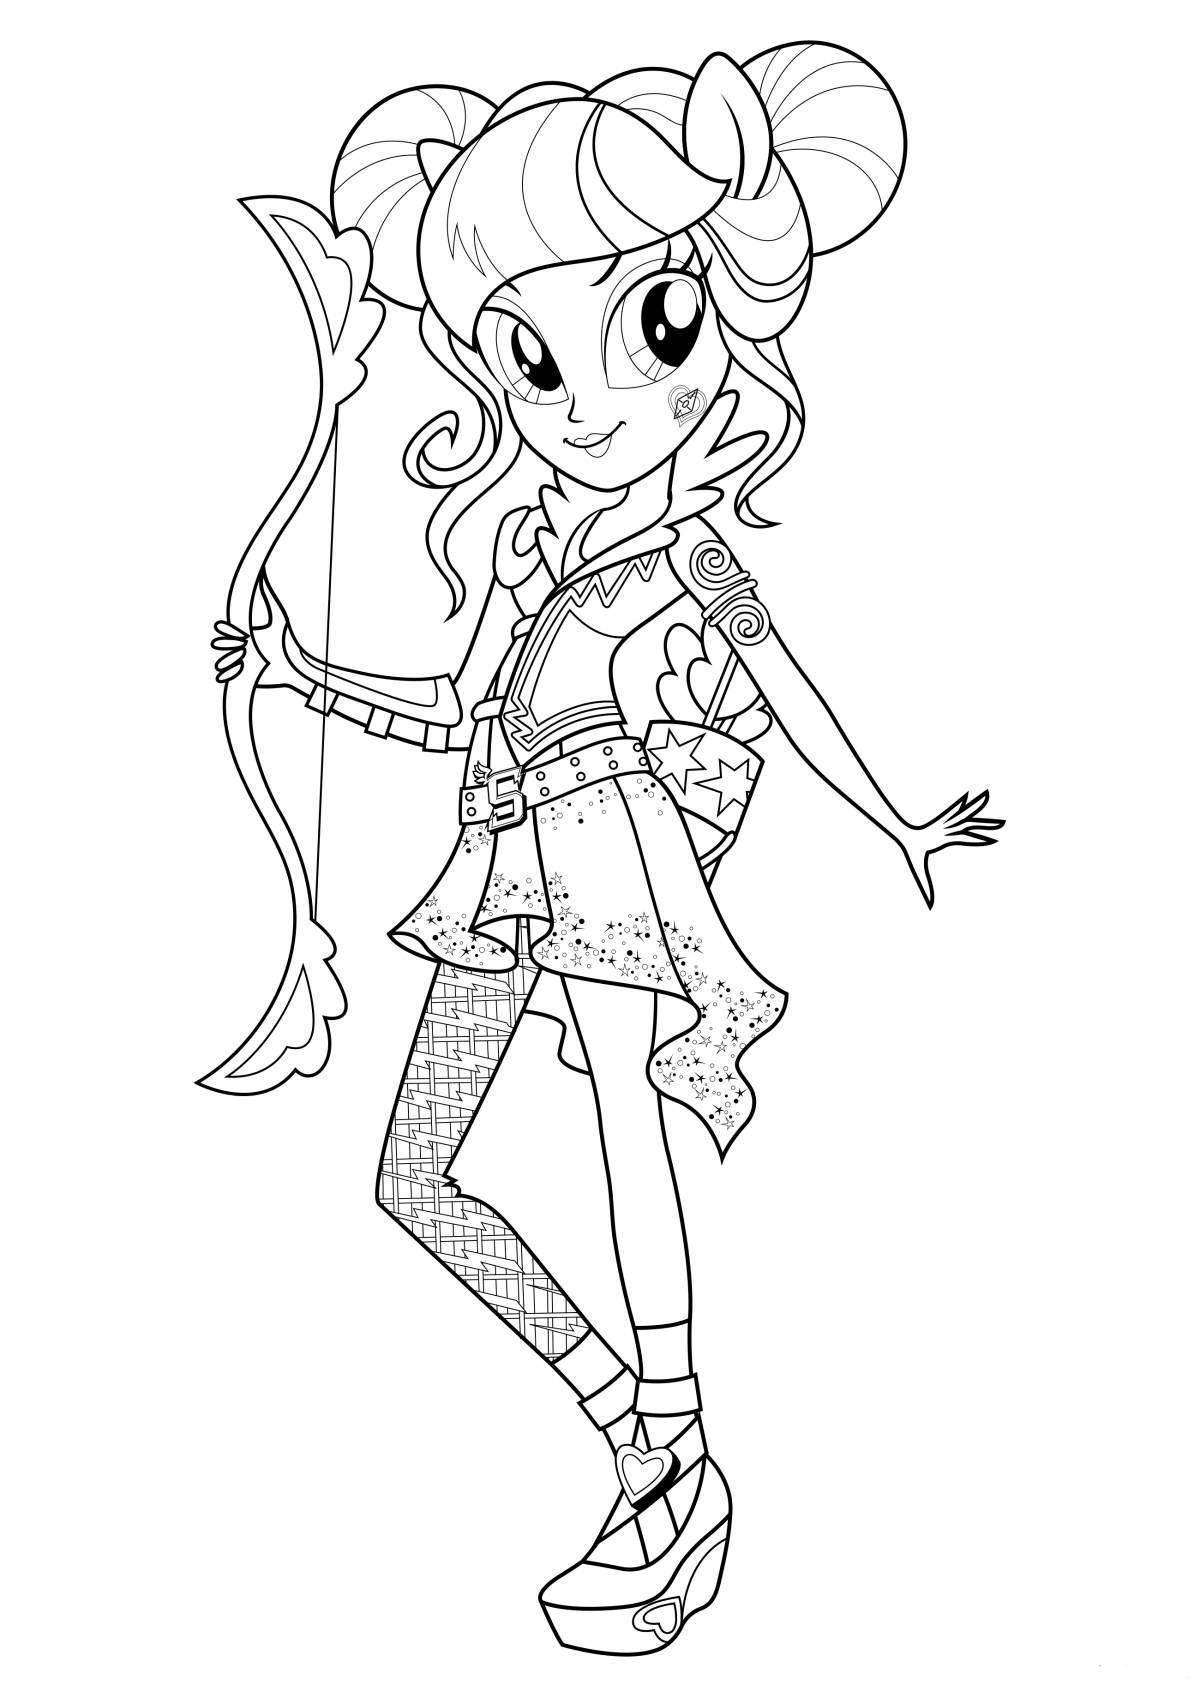 Playful little pony girl coloring book